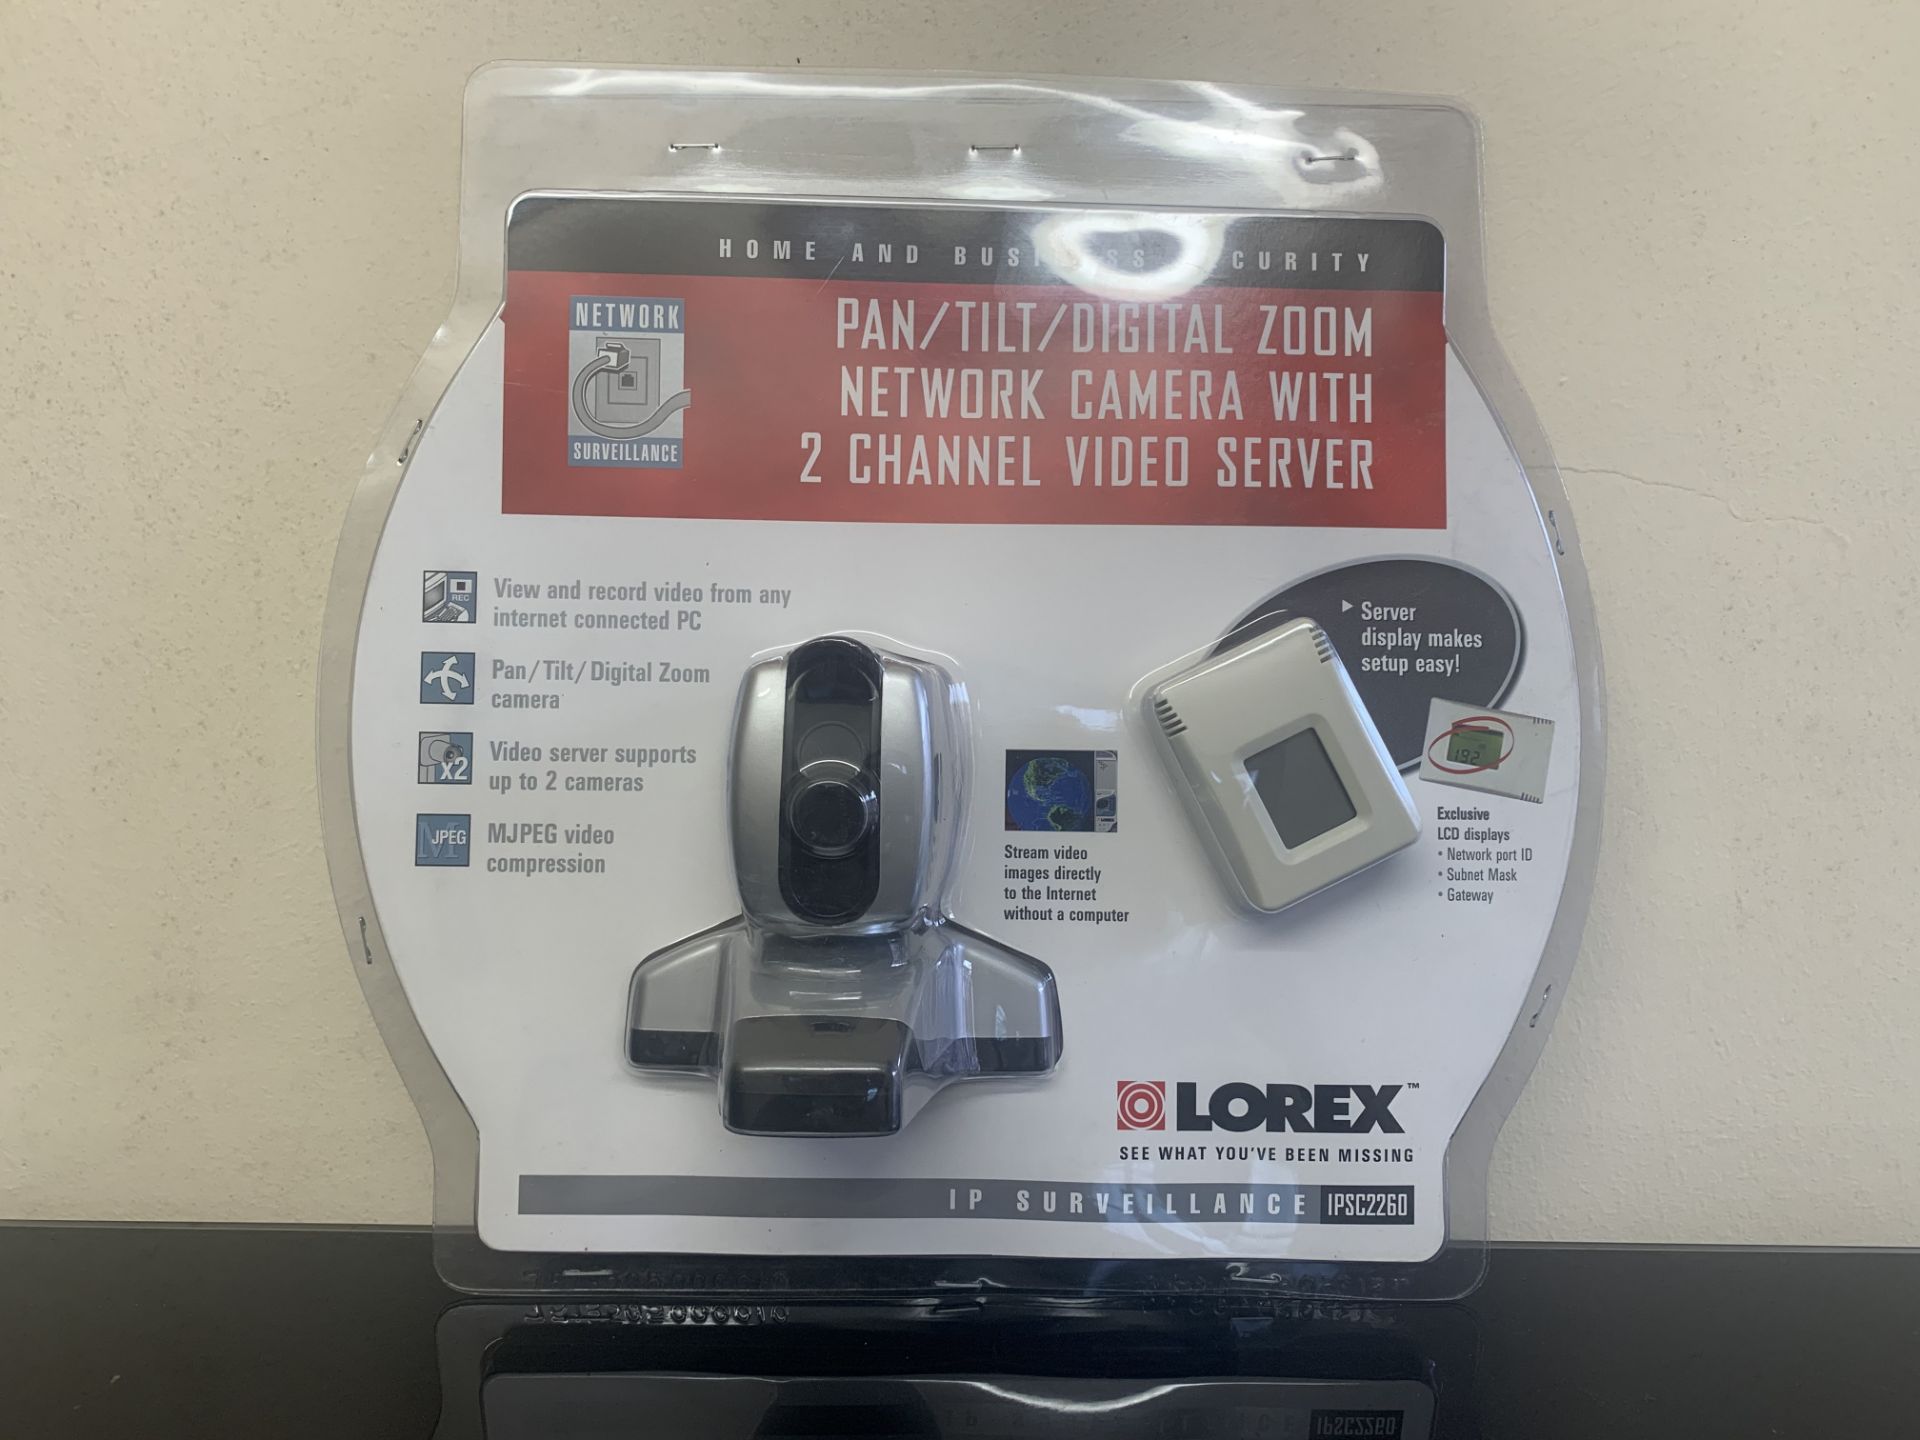 2 X LOREX HOME AND BUSINESS SECURITY PAN / TILT / DIGITAL ZOOM NETWORK CAMERA WITH 2 CHANNEL VIDEO